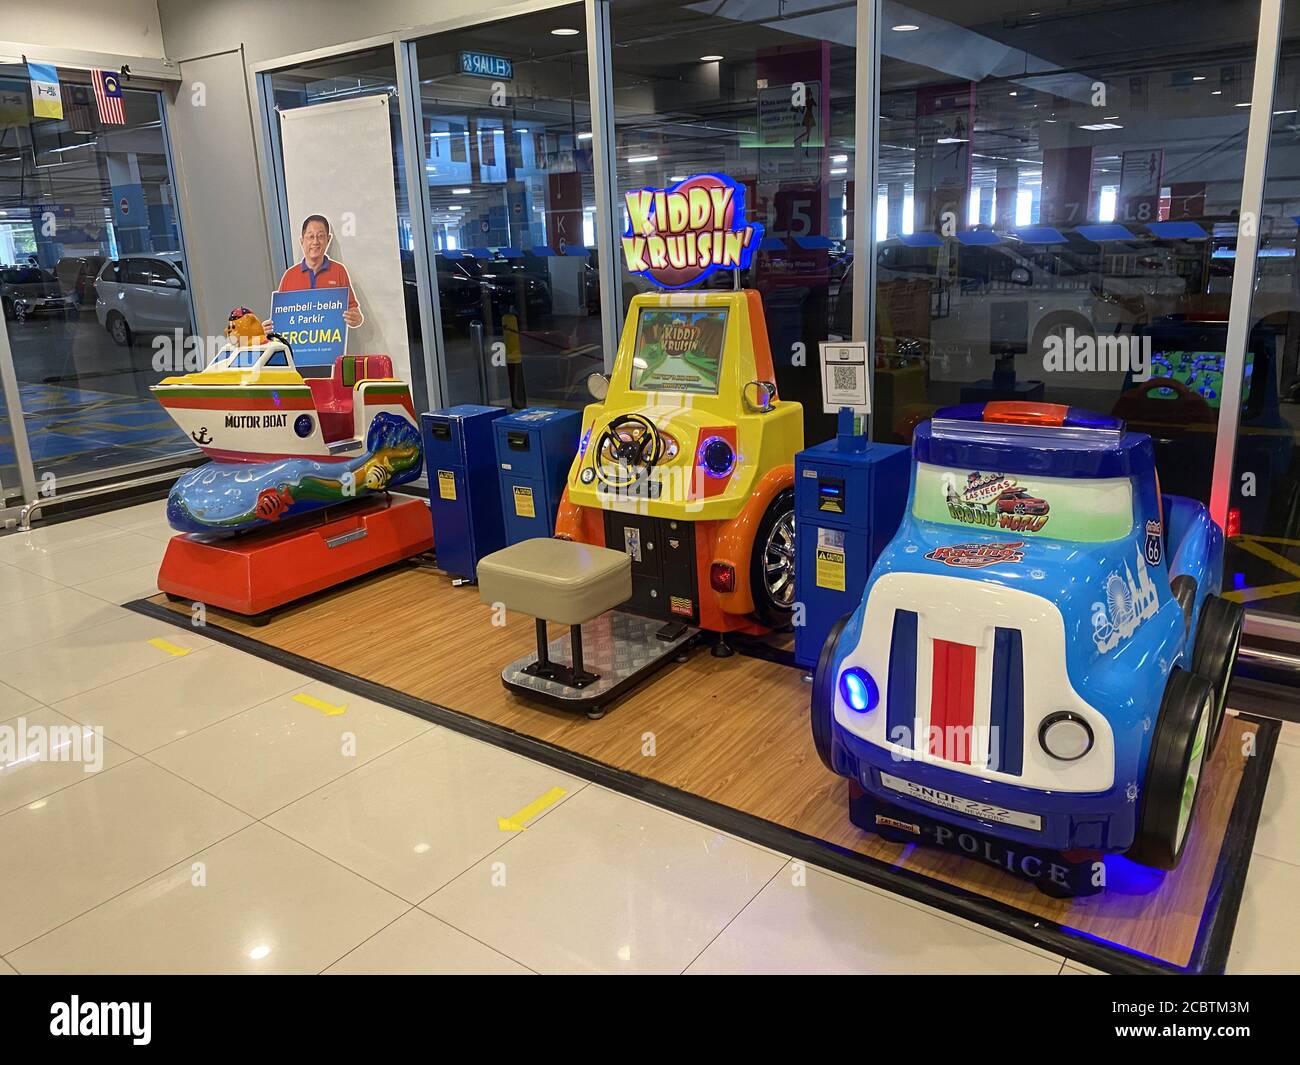 Penang, Malaysia - August 16, 2020 : View of three coin operated kiddie rides displayed at the entrance of a store at Tesco Egate Penang Stock Photo